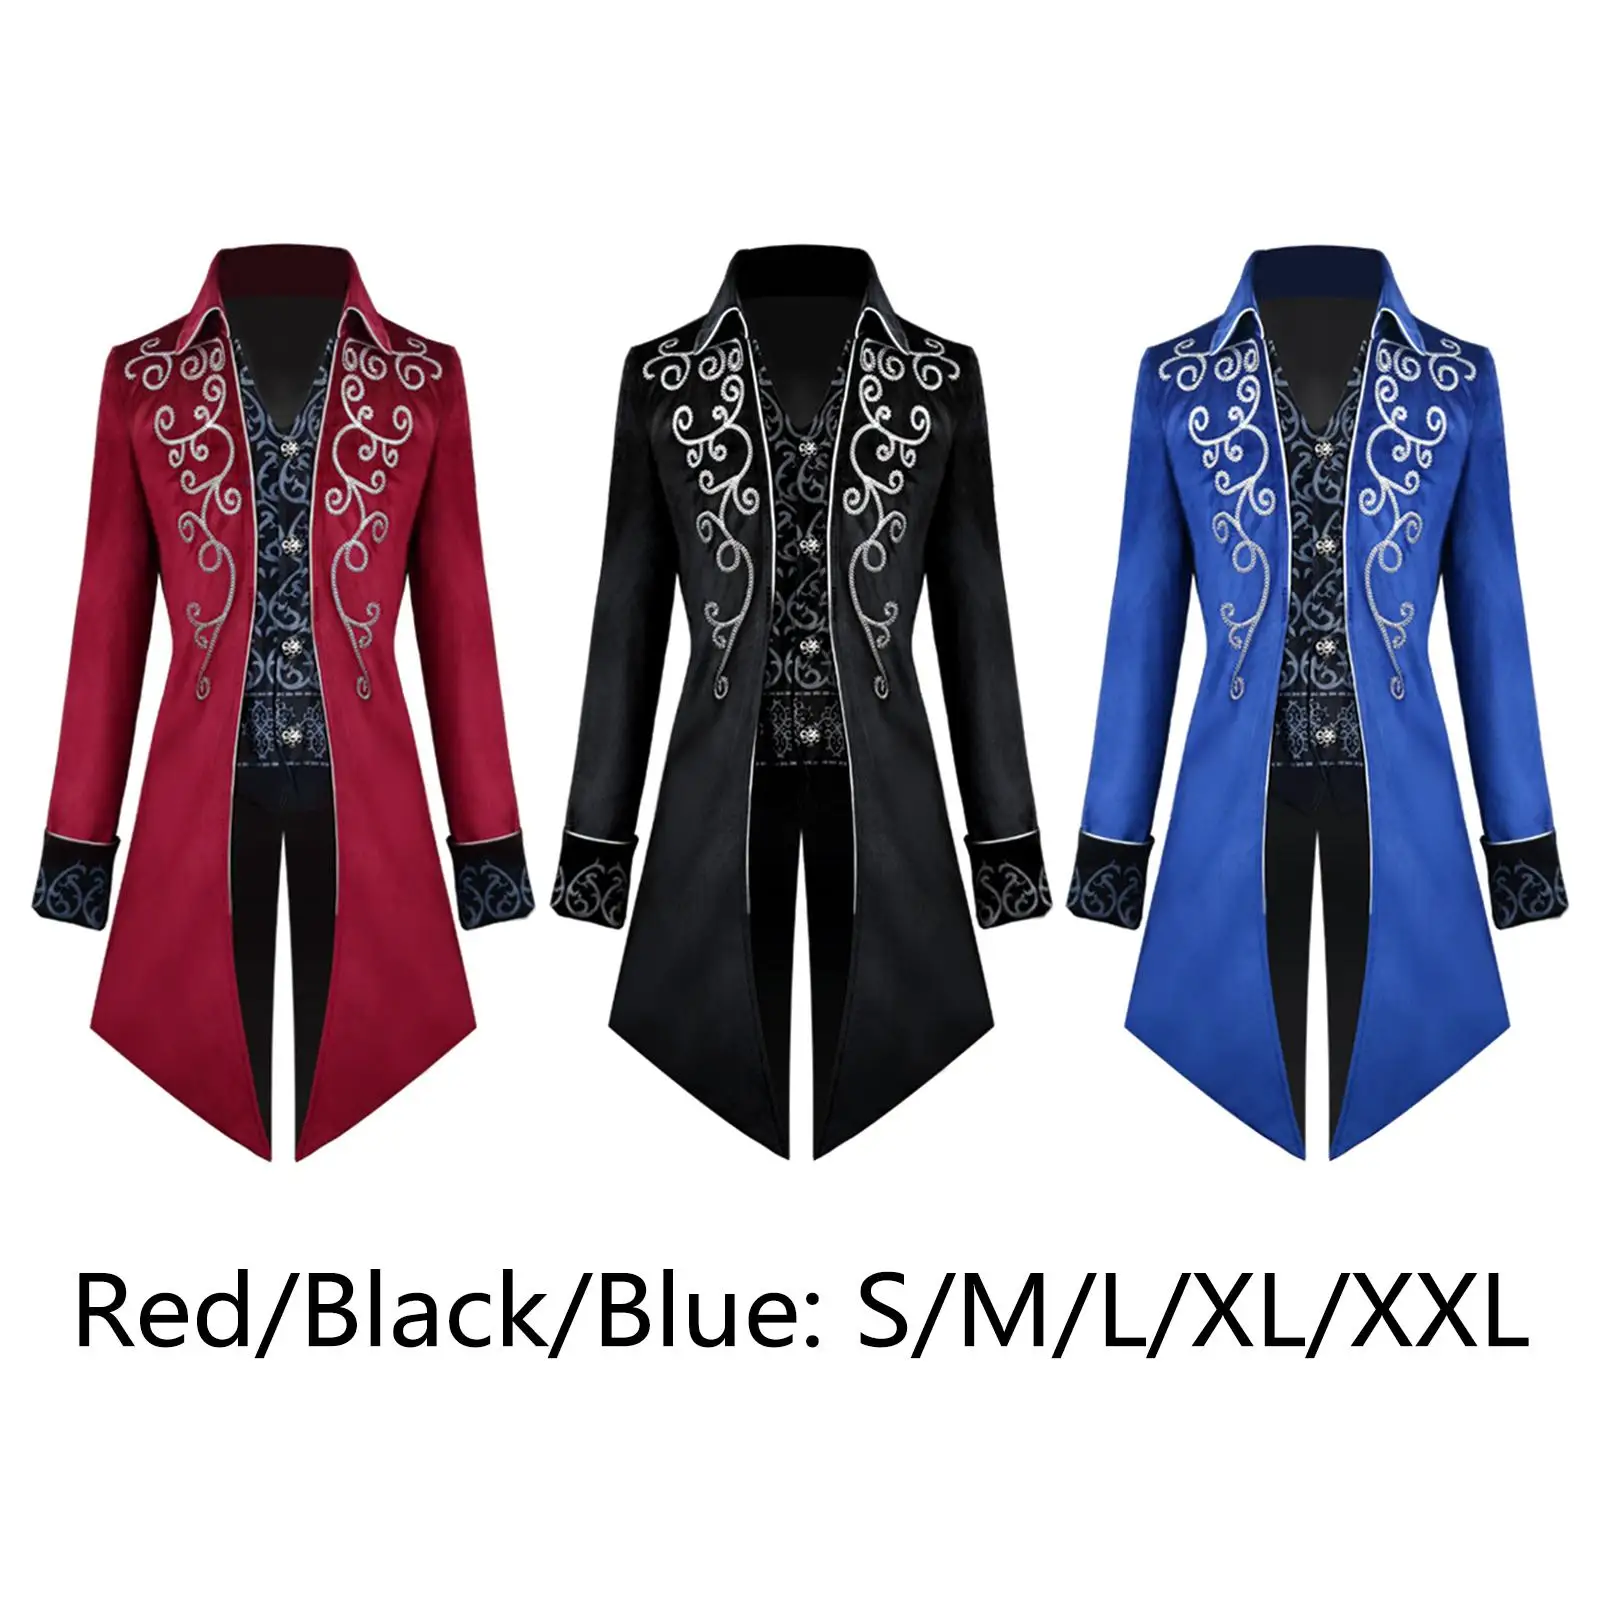 Men Womens Medieval Gothic Tailcoat  Steampunk Lapel Long Coat Overcoat Trench Coat Costume for  Party Prom Halloween Stage